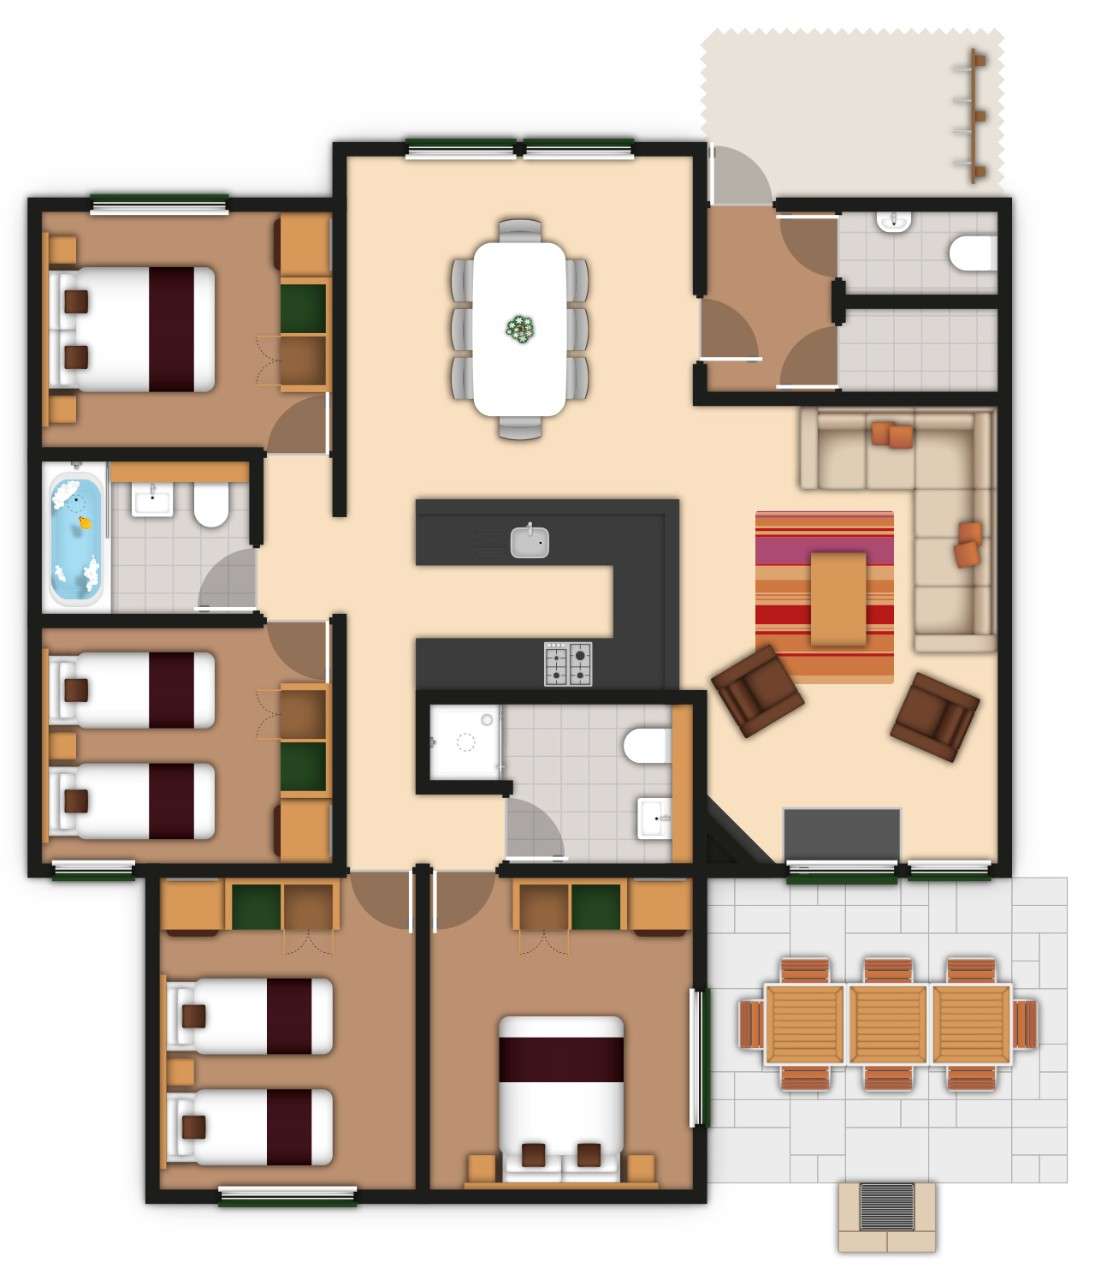 A detailed lodge floor plan illustration. If you require further assistance viewing the floor plan or need further information on the accommodation type please contact Guest Services.